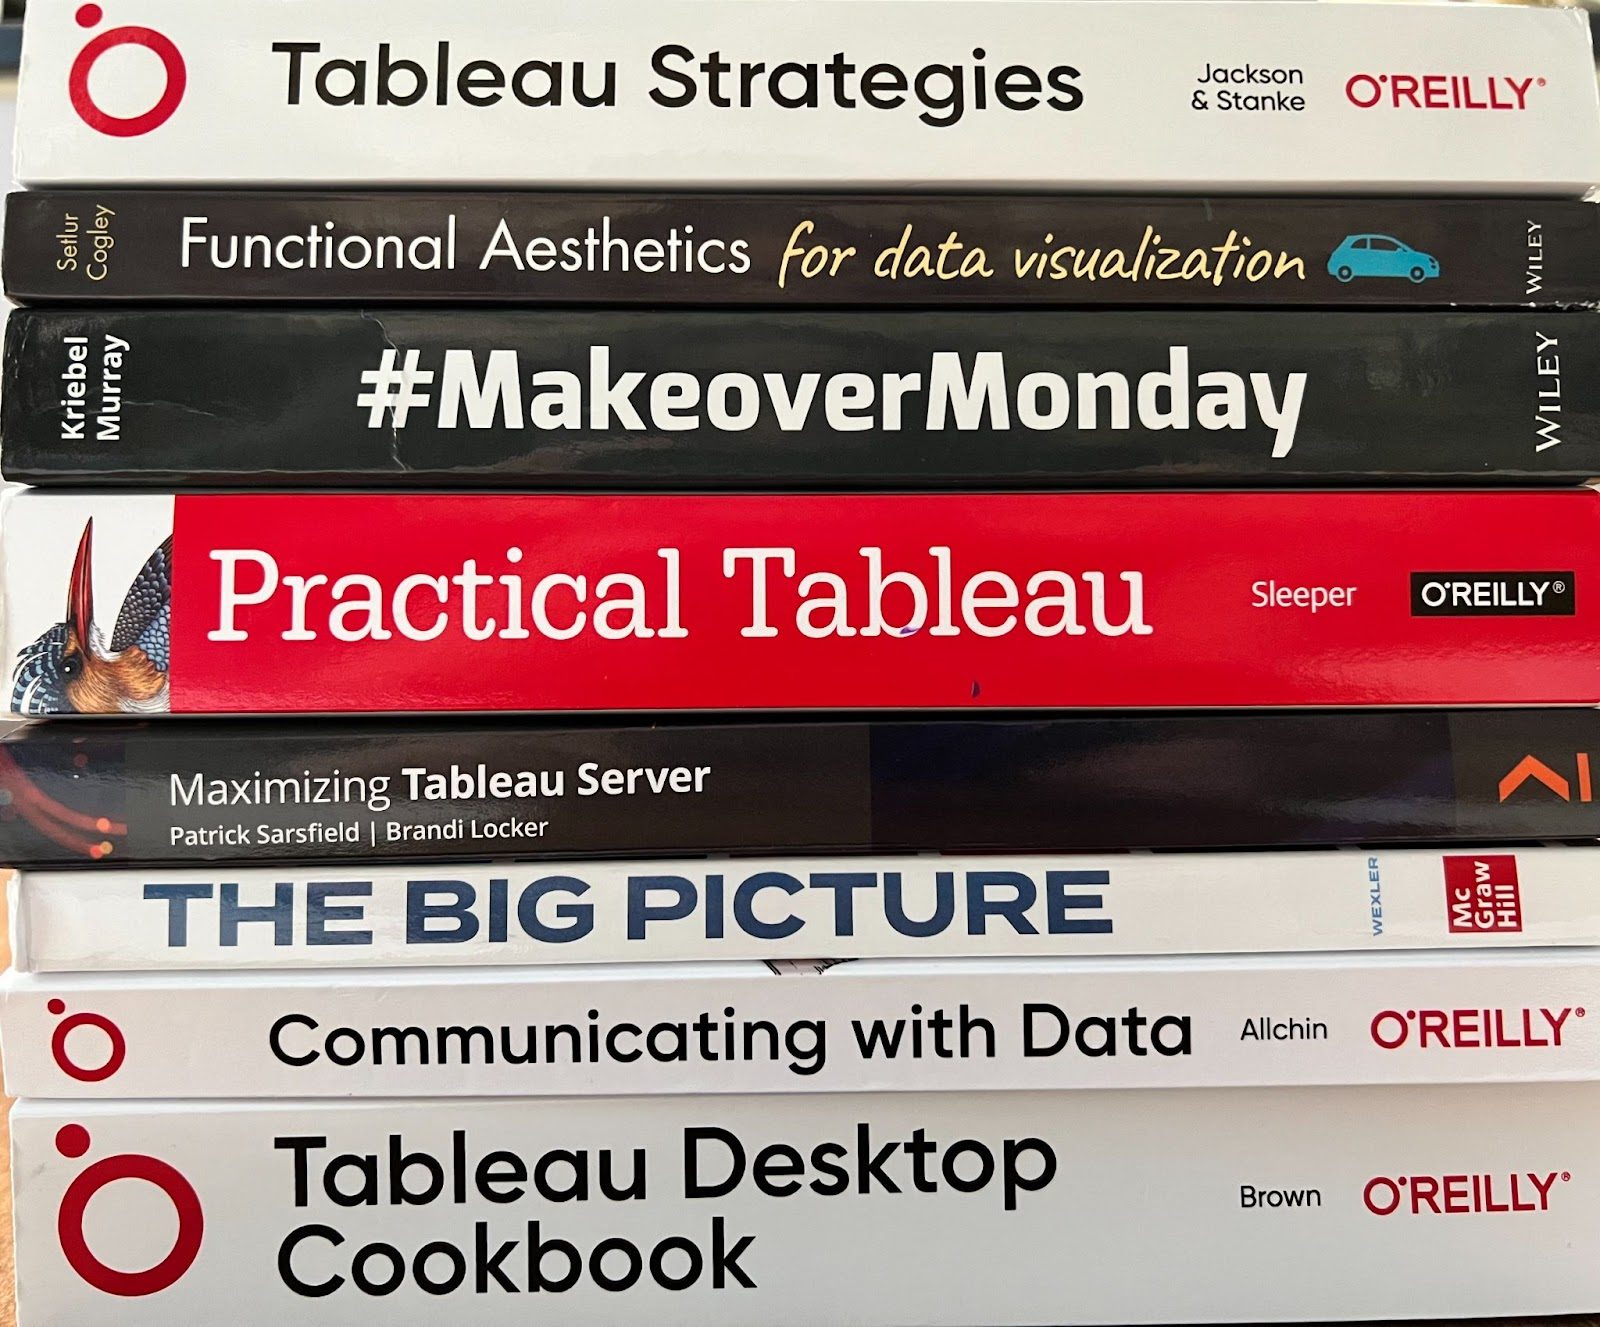 The author’s data bookshelf titles: Tableau Strategies, Functional Aesthetics for data visualization, #MakeoverMonday, Practical Tableau, and more